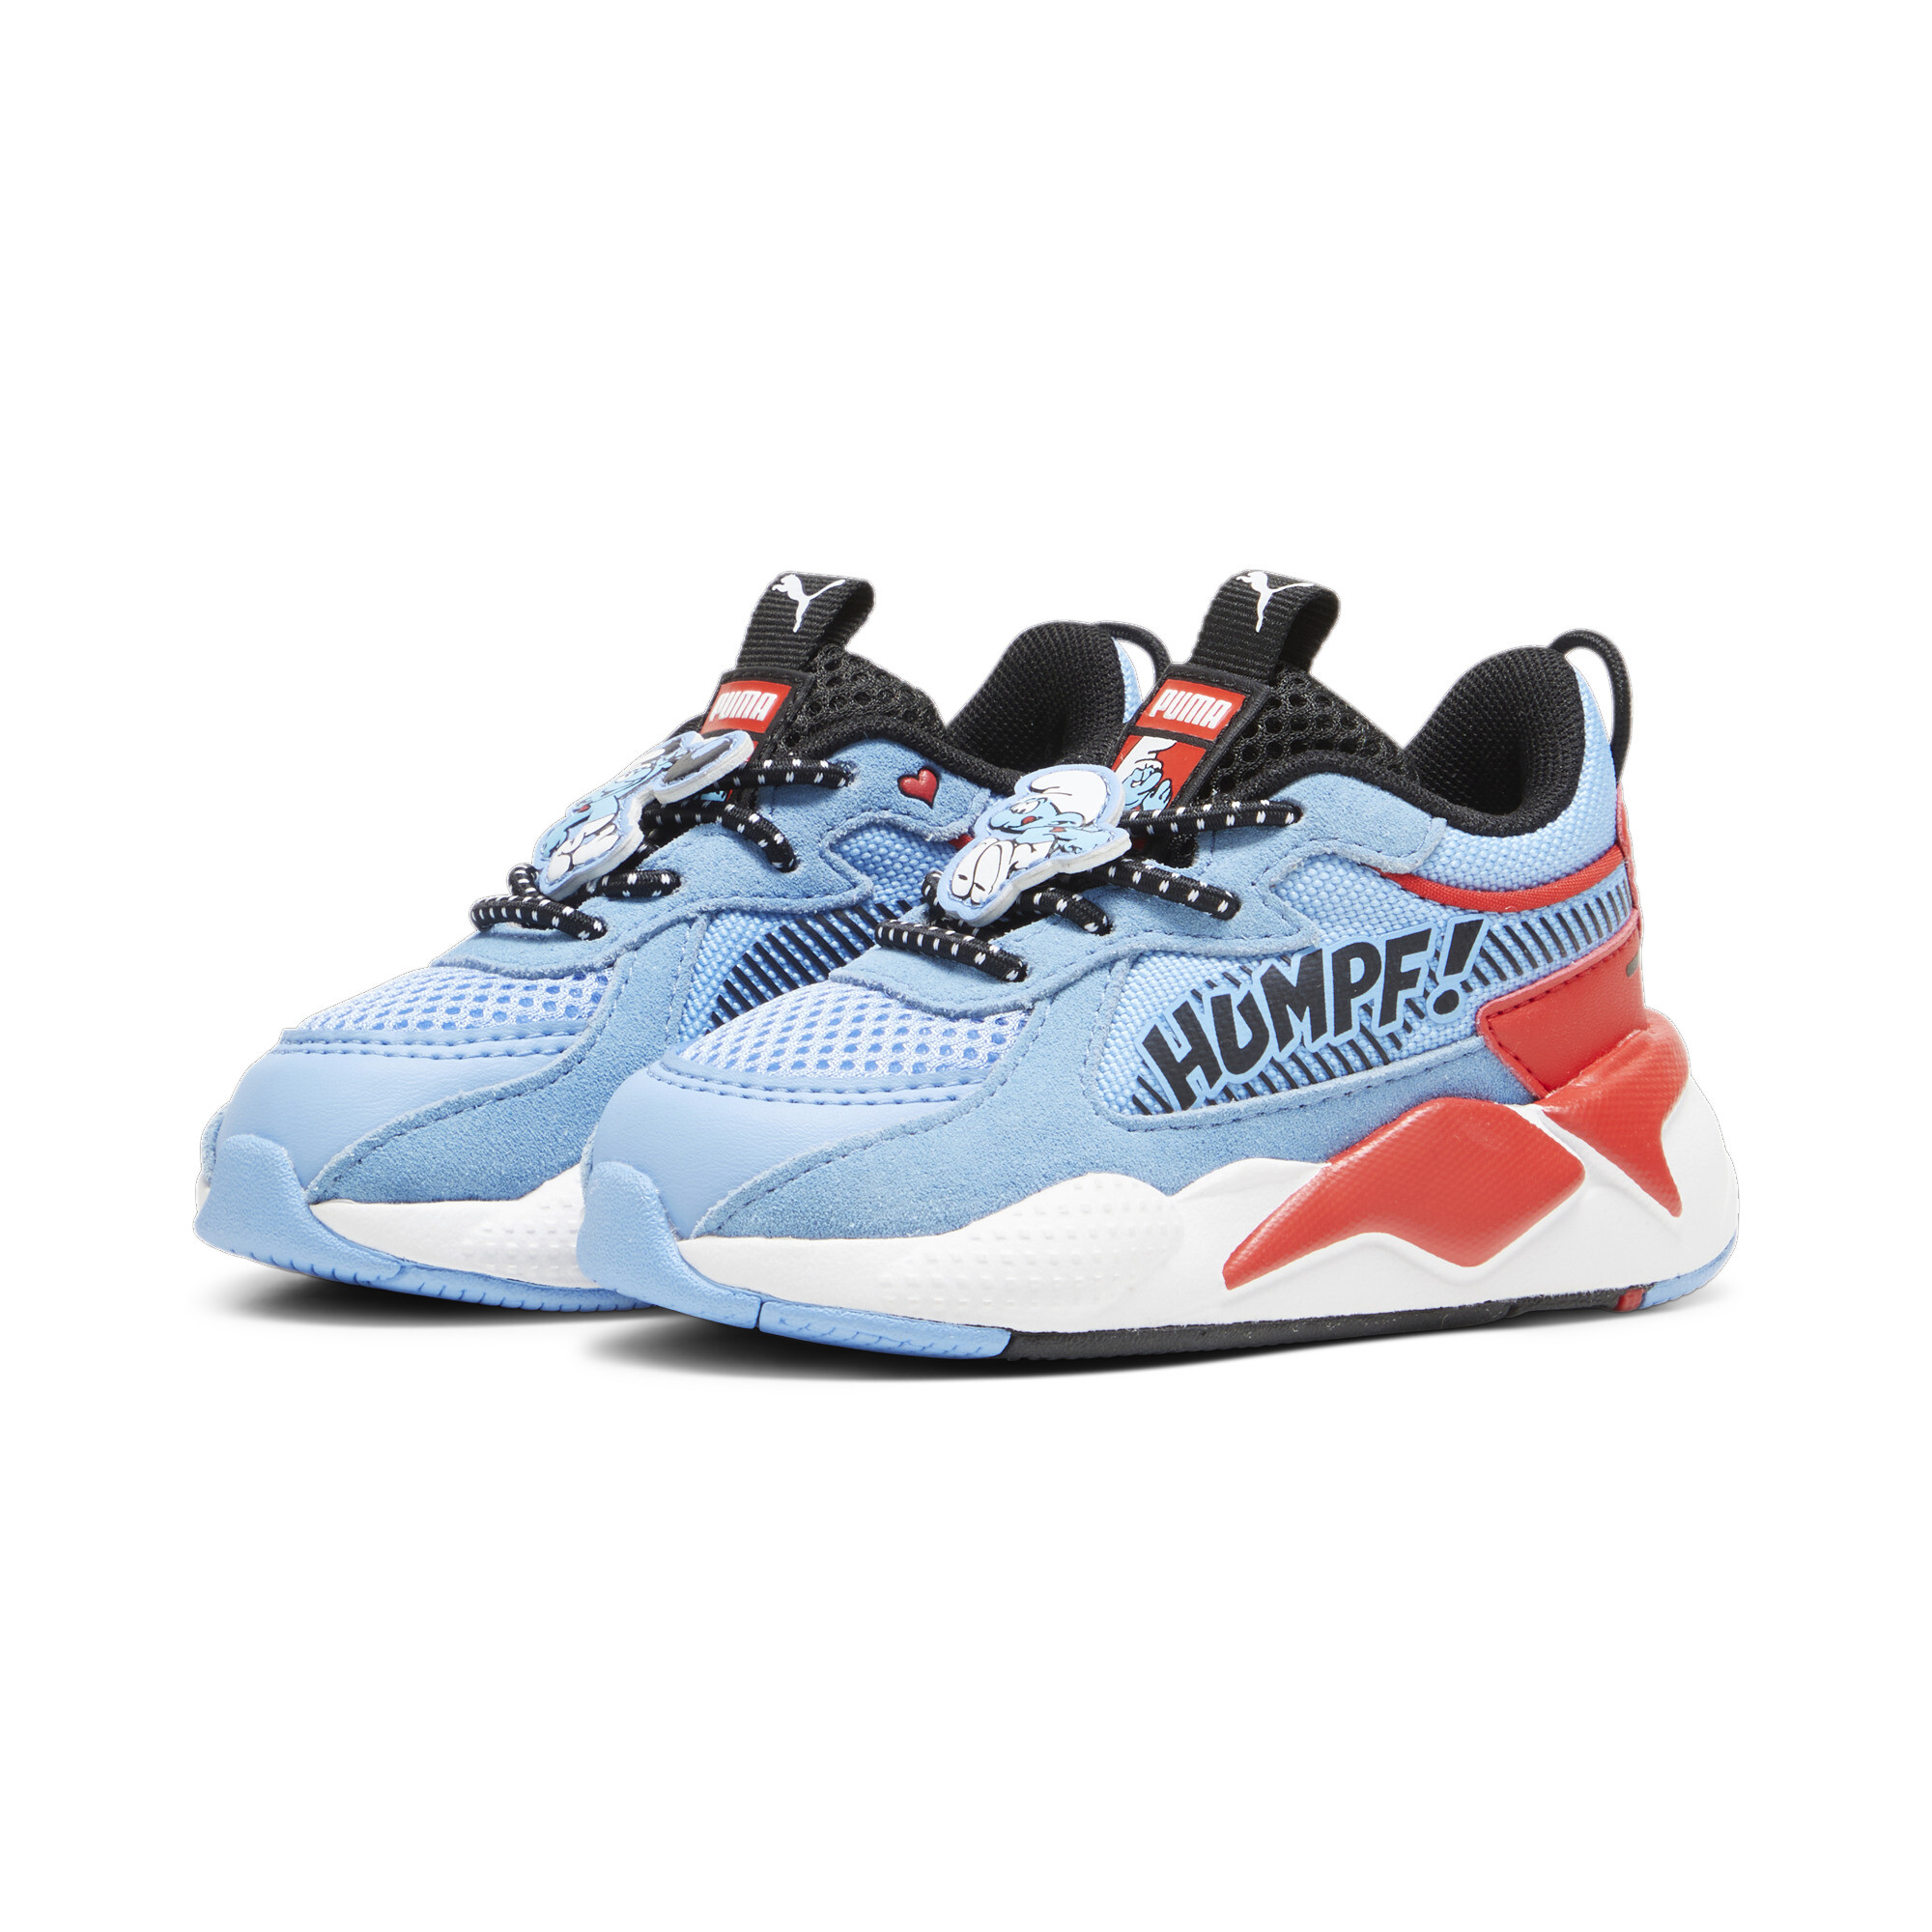 Kids' PUMA X THE SMURFS RS-X Toddlers' Sneakers In Blue, Size EU 19